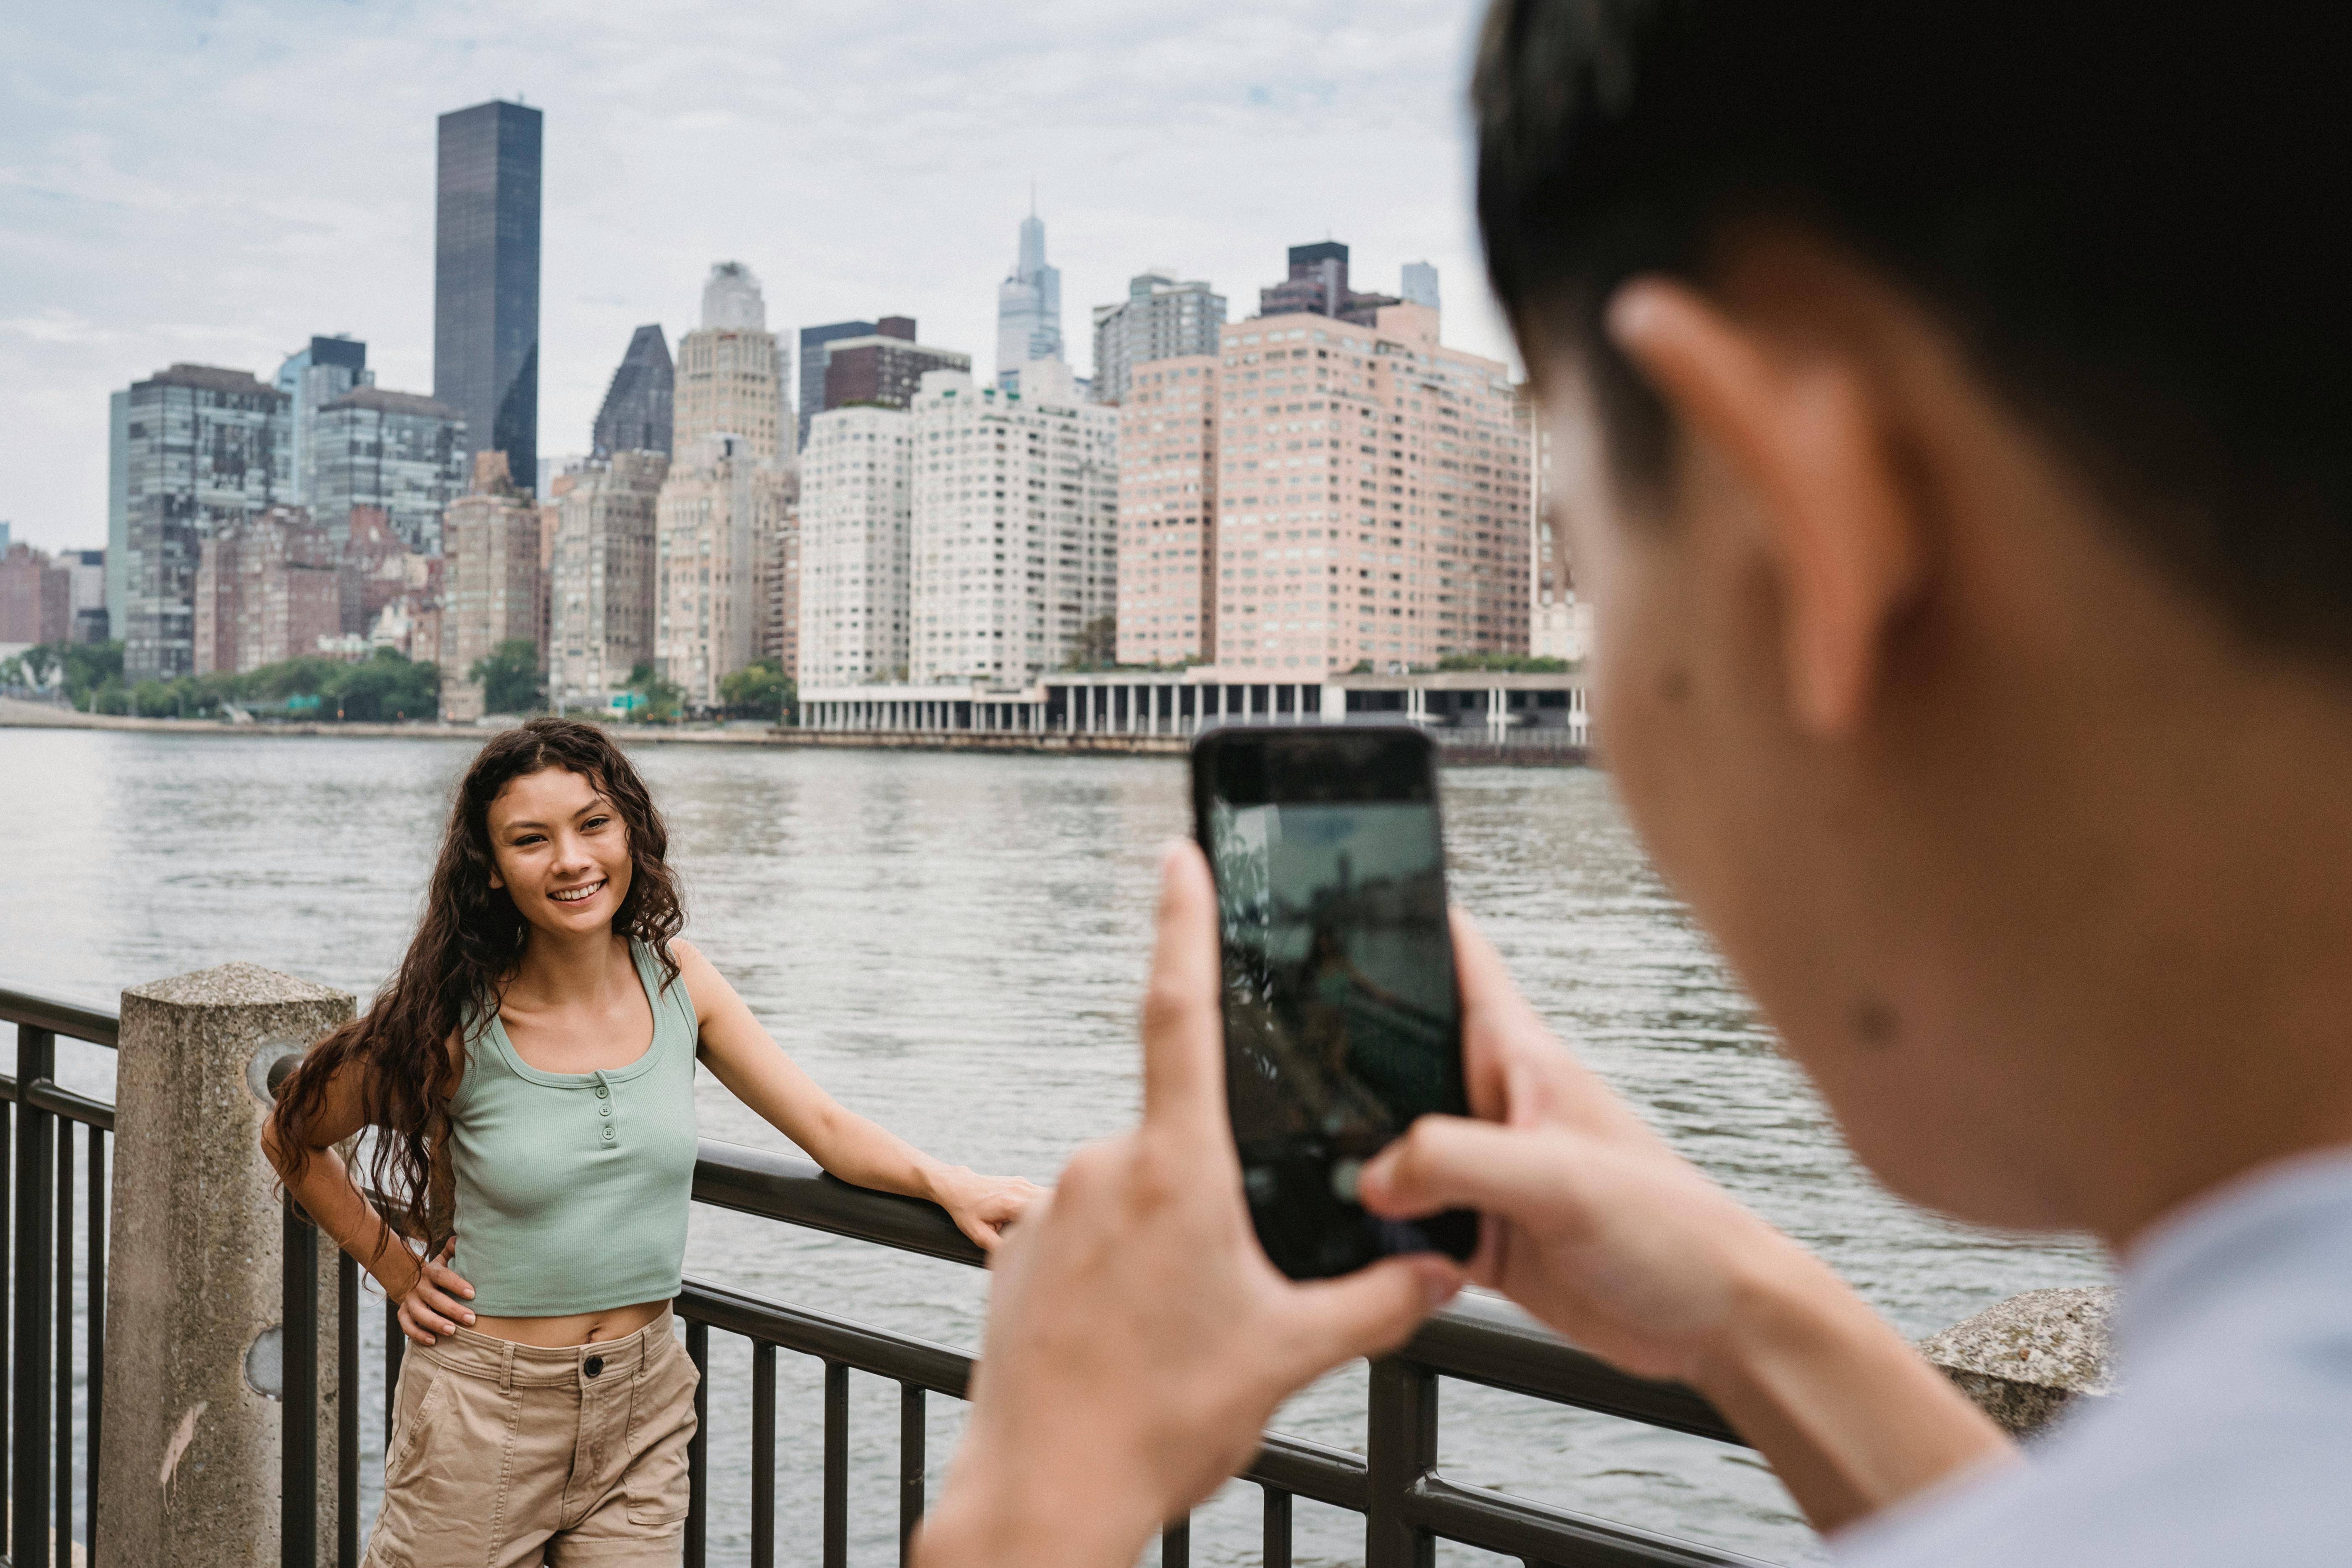 crop male taking photo of smiling ethnic girlfriend on city embankment against modern skyscrapers